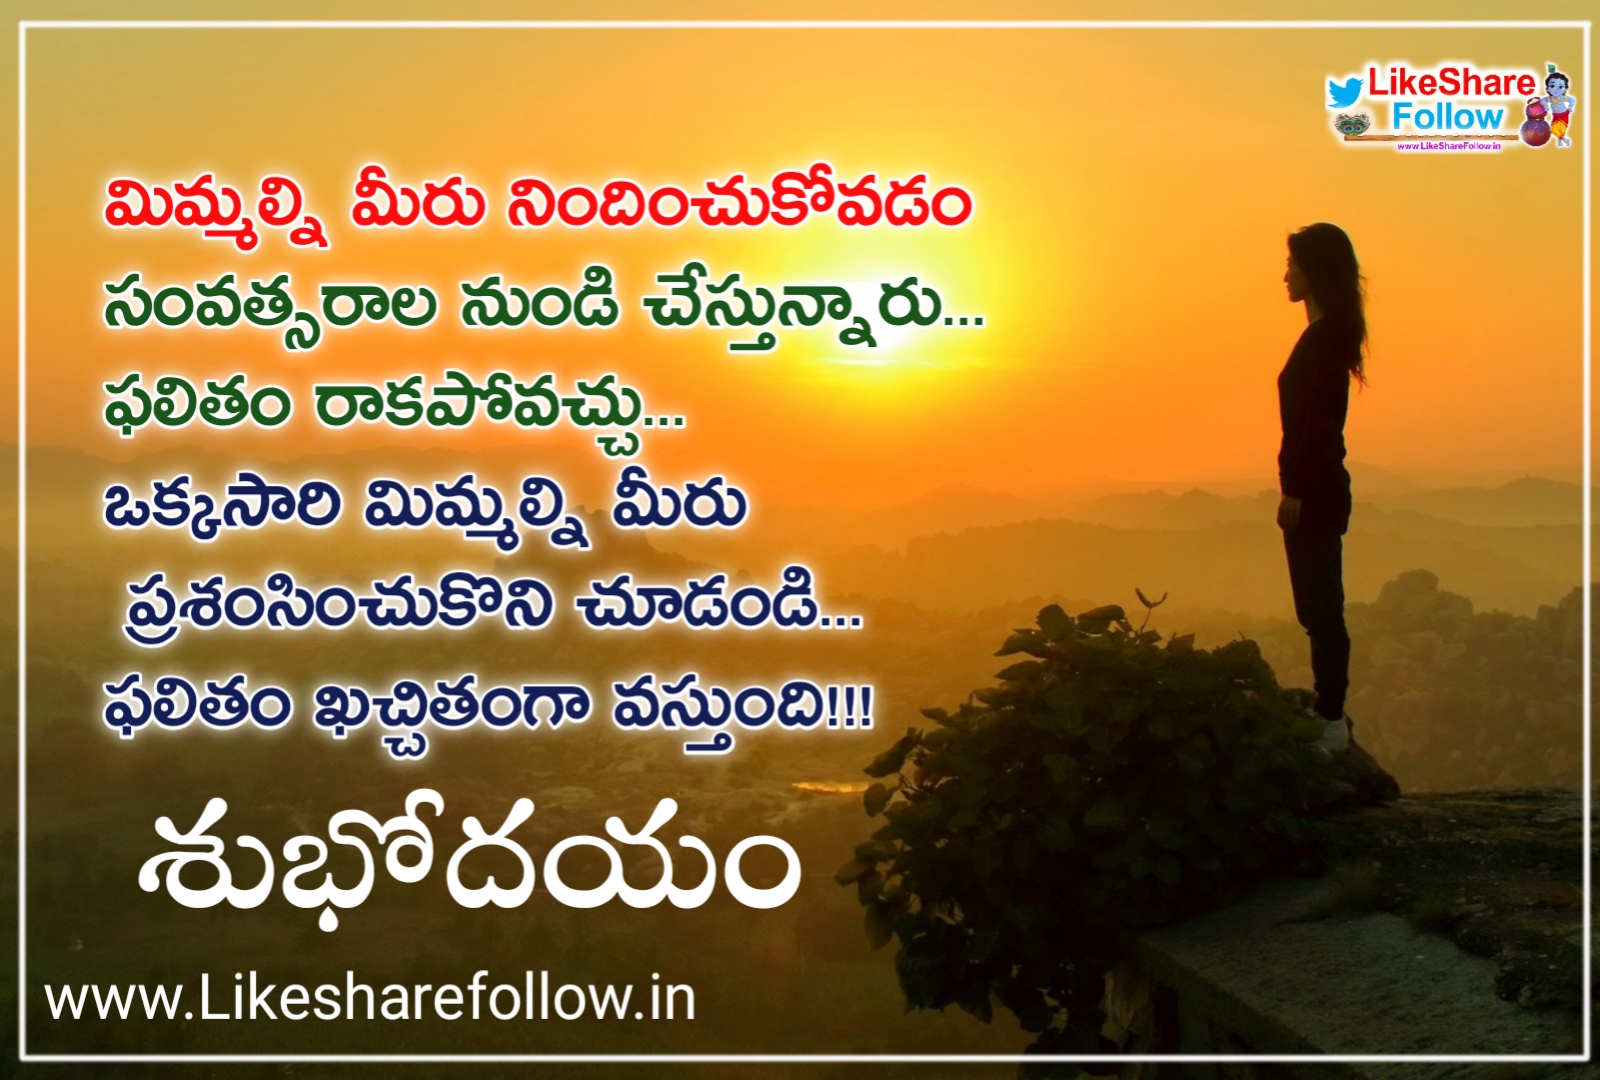 Telugu New Good Morning Quotes and Wishes | Like Share Follow